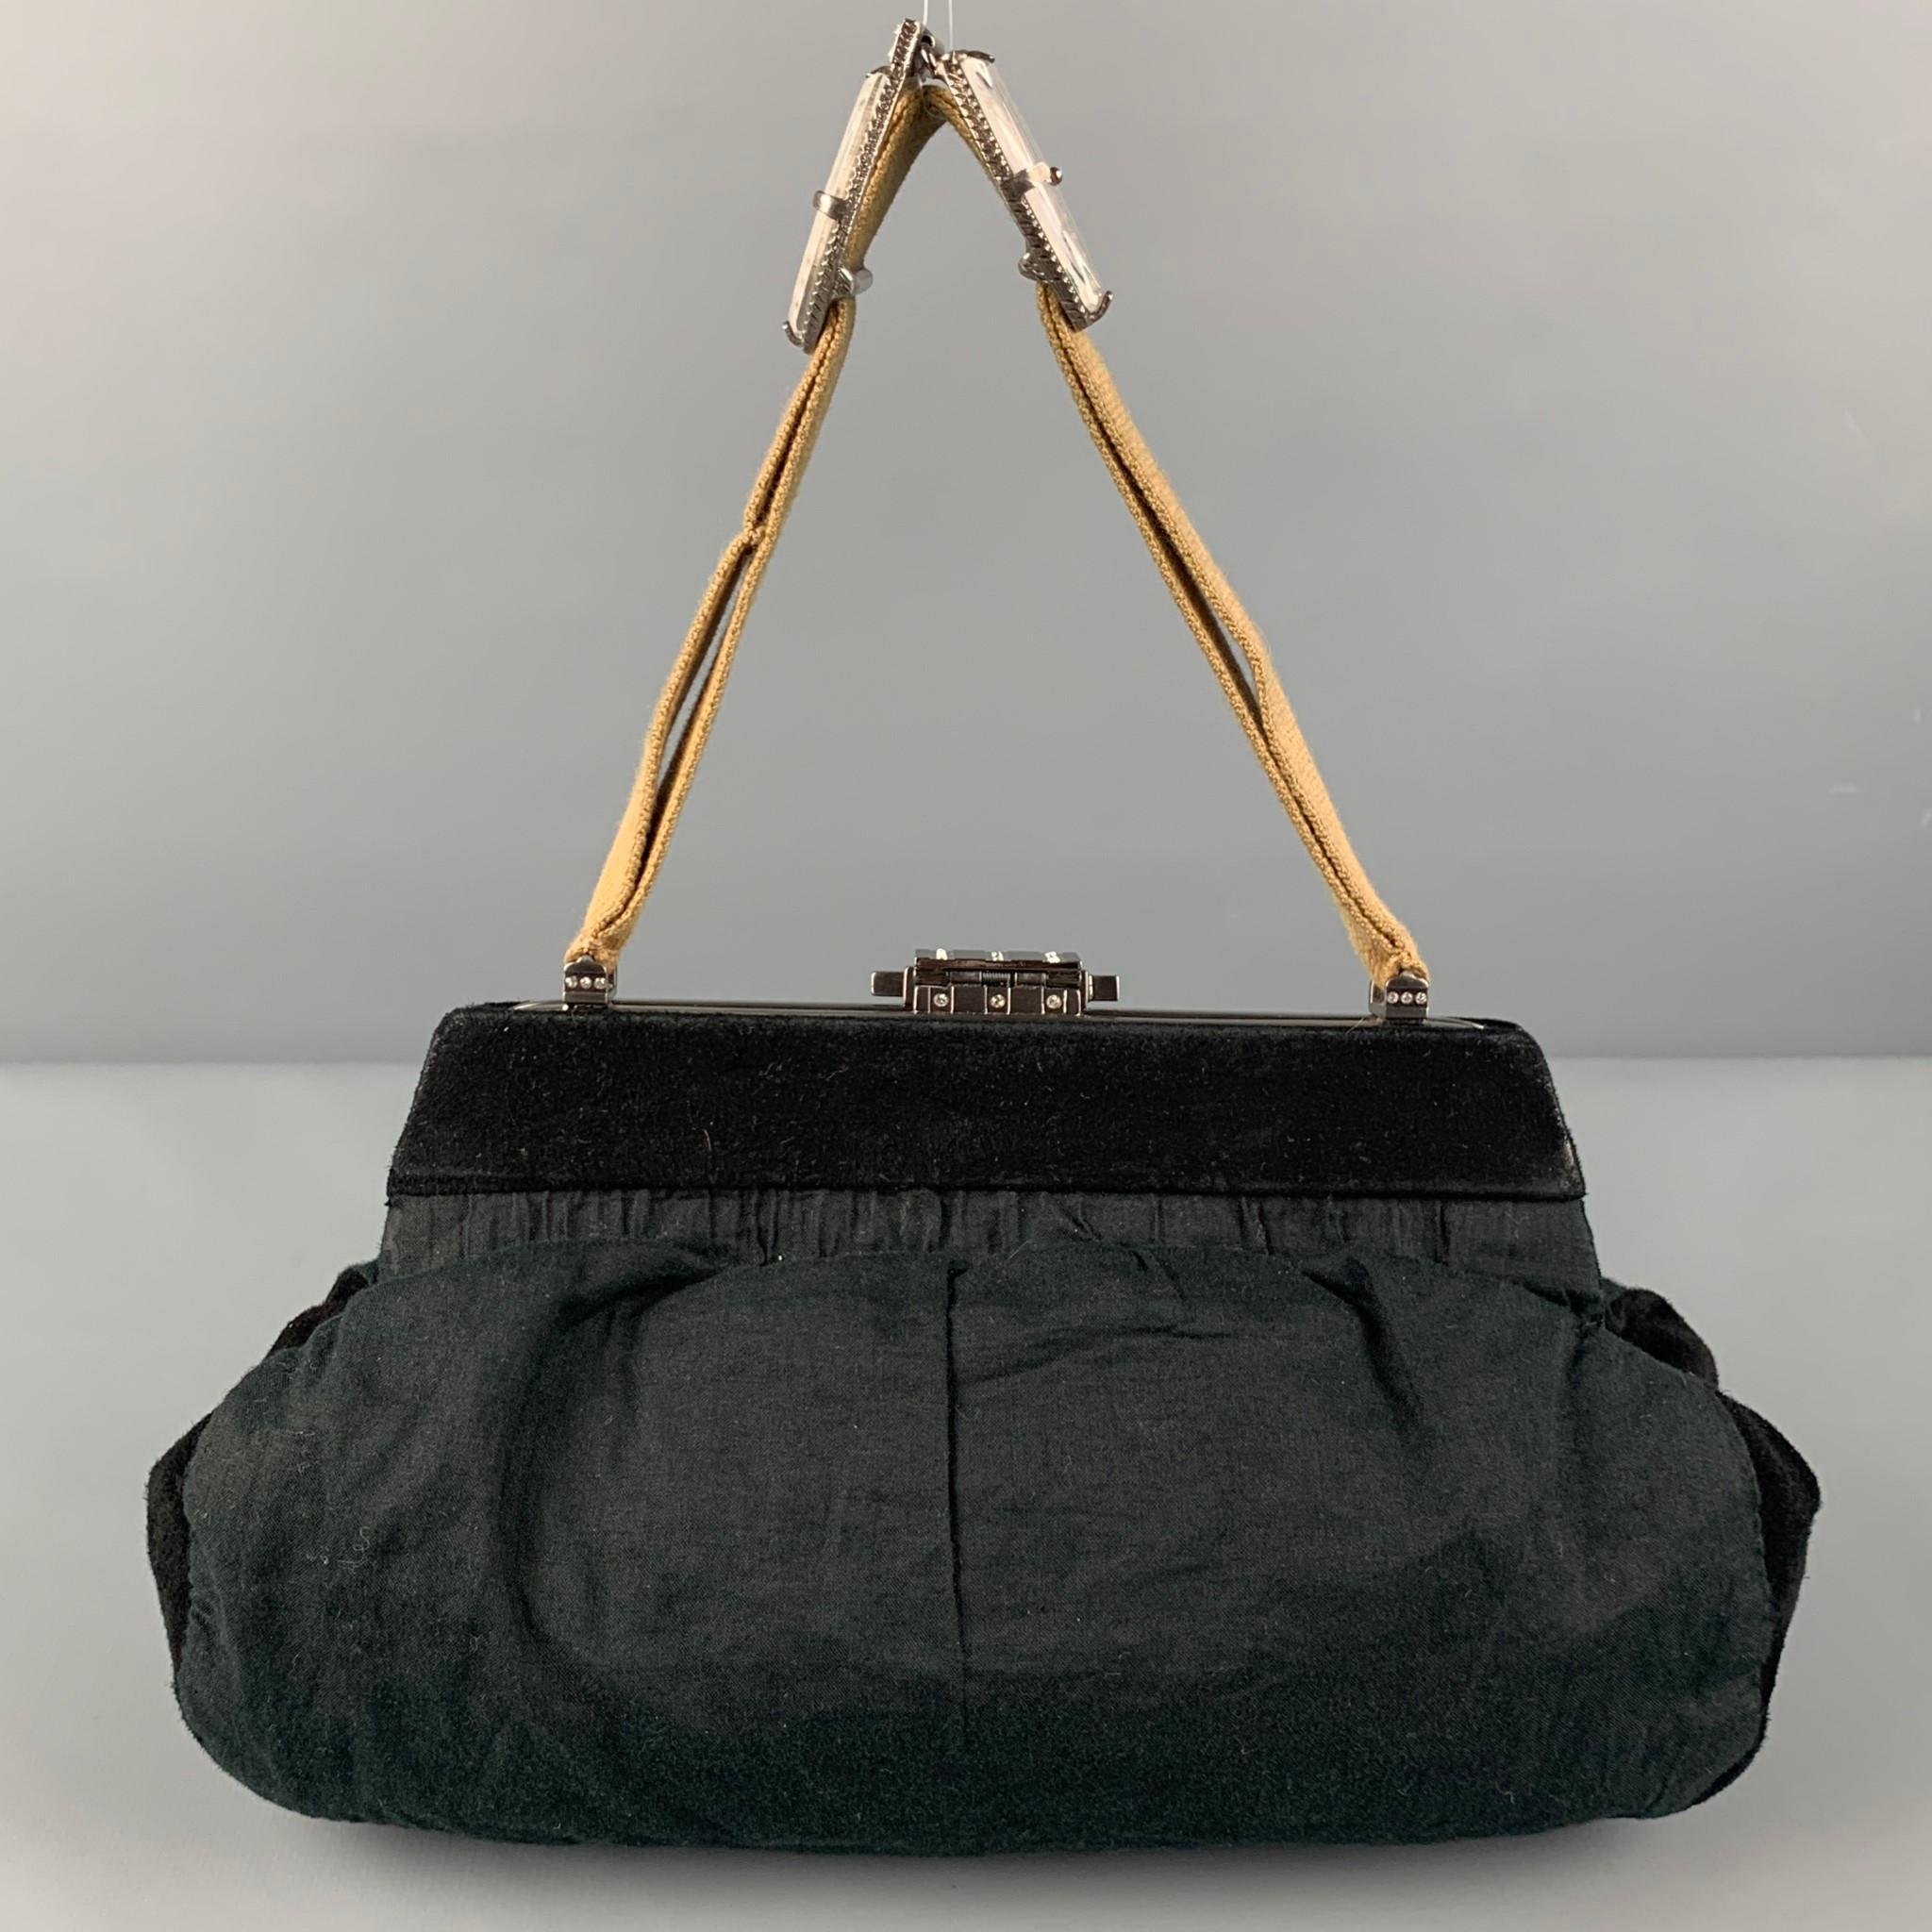 MARNI handbag comes in a black material with a suede trim featuring a large clasp detail, canvas top handles, inner pocket, and a push open closure. Made in Italy. 

Very Good Pre-Owned Condition.
Original Retail Price: